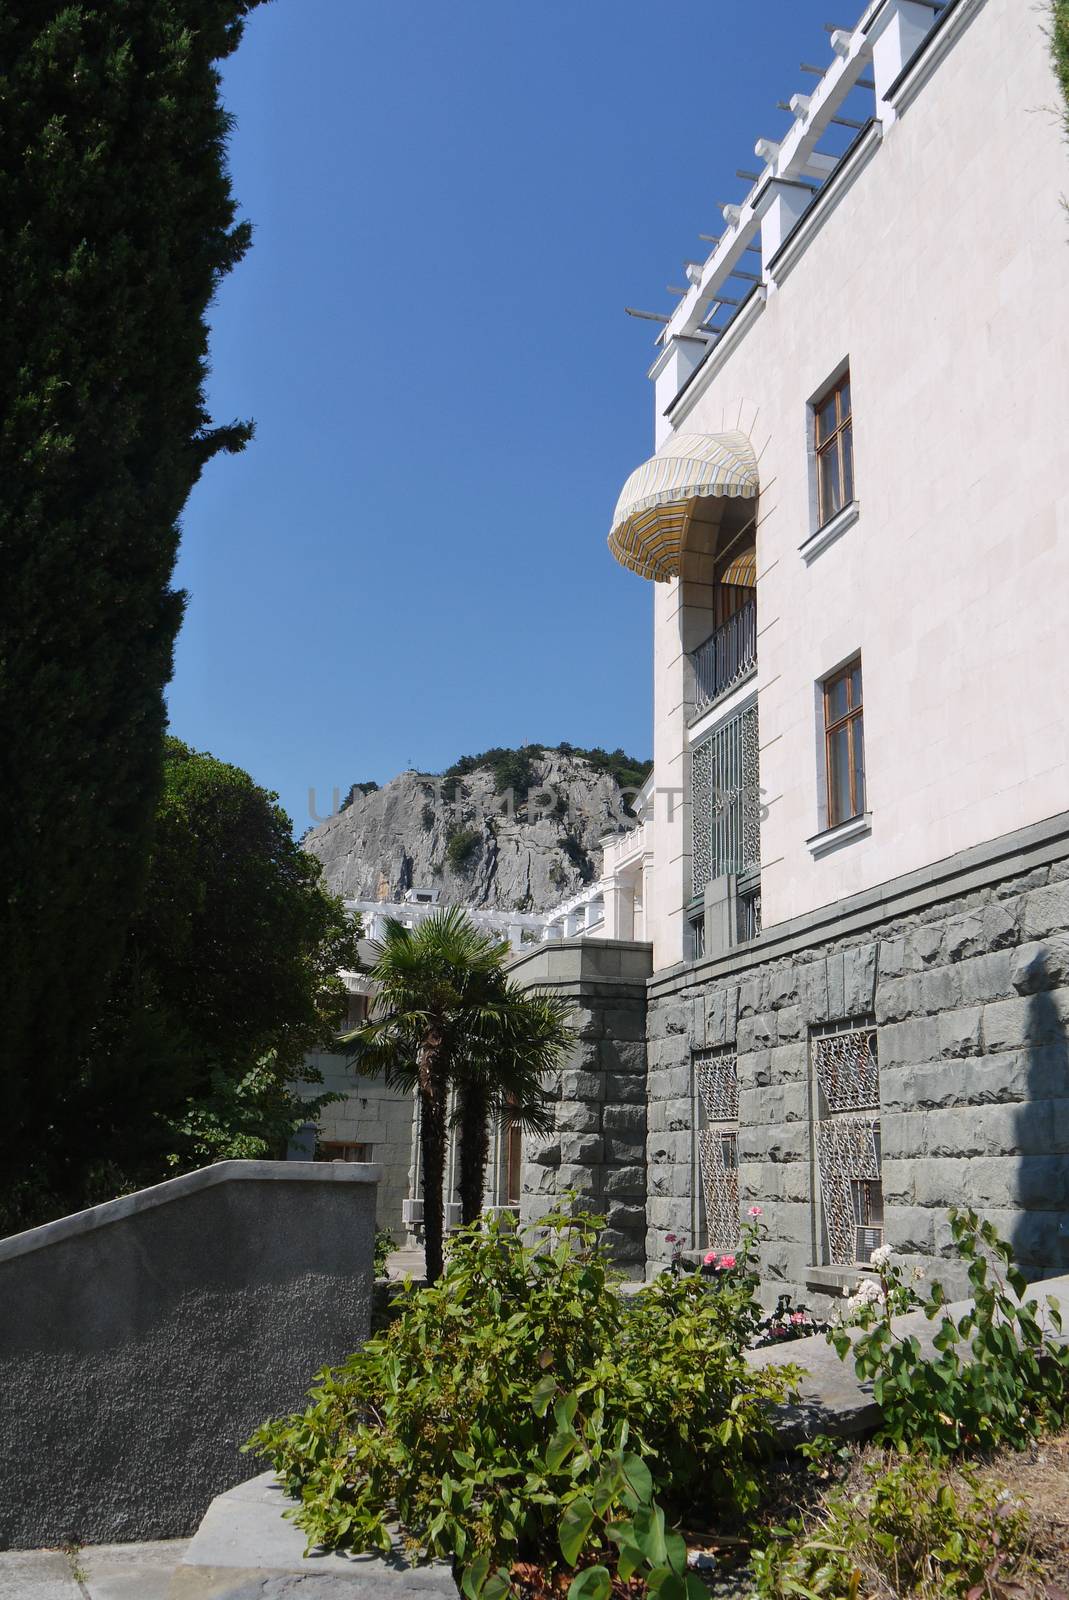 The building of the sanatorium complex with a beautiful balcony and palm trees under it against the background of a high rocky cliff by Adamchuk